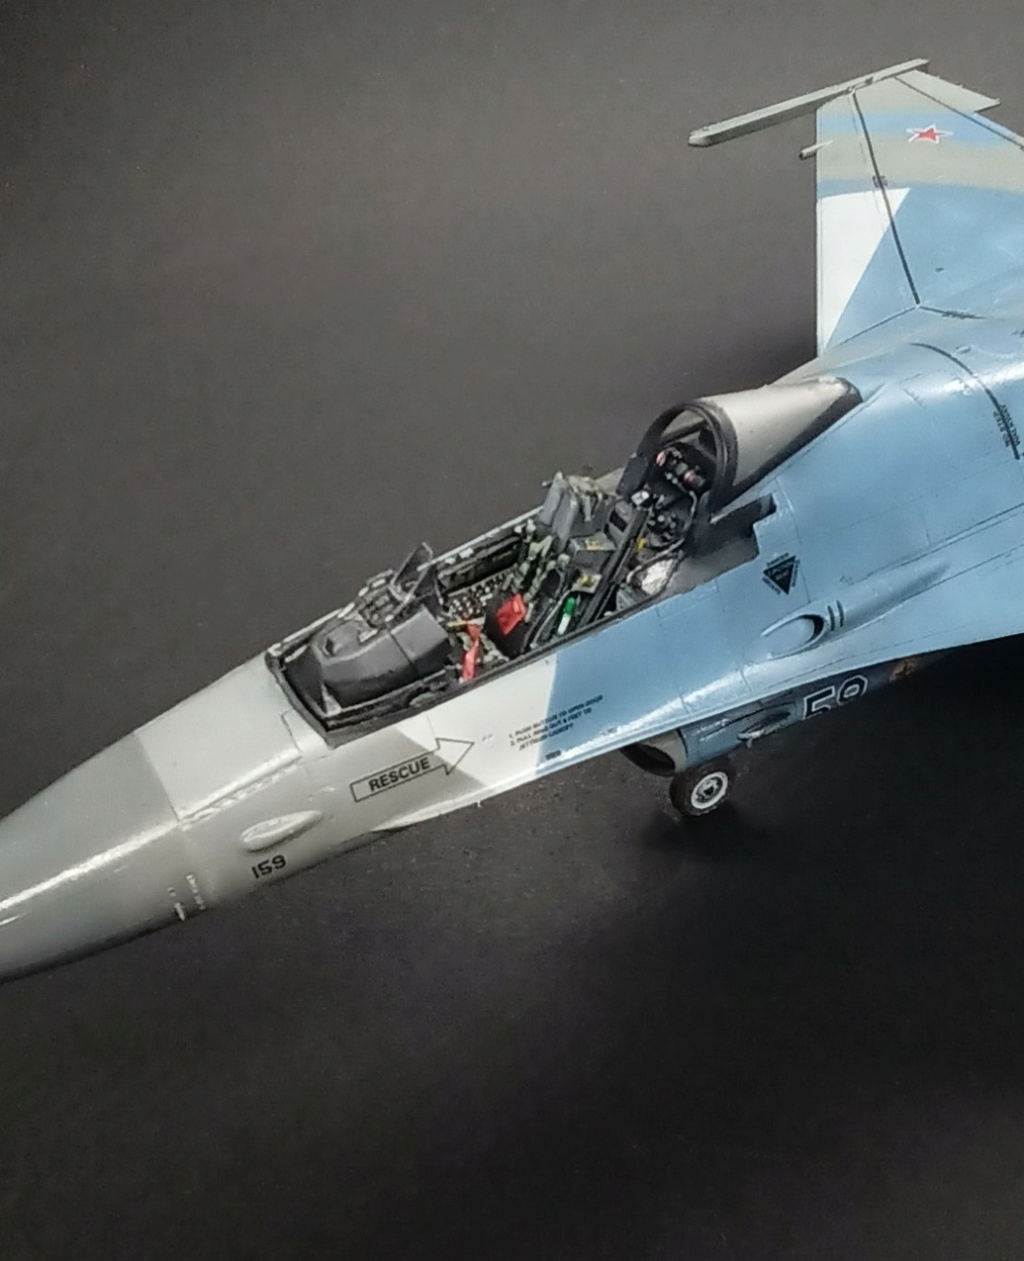 [Kinetic] 1/48  - McDonnell F/A-18A+ Hornet- VFC 12   / Double  [Tamiya] General Dynamics F-16C Fighting Falcon - 64th AGRS  1/48  - Aggressor - Page 4 20240223